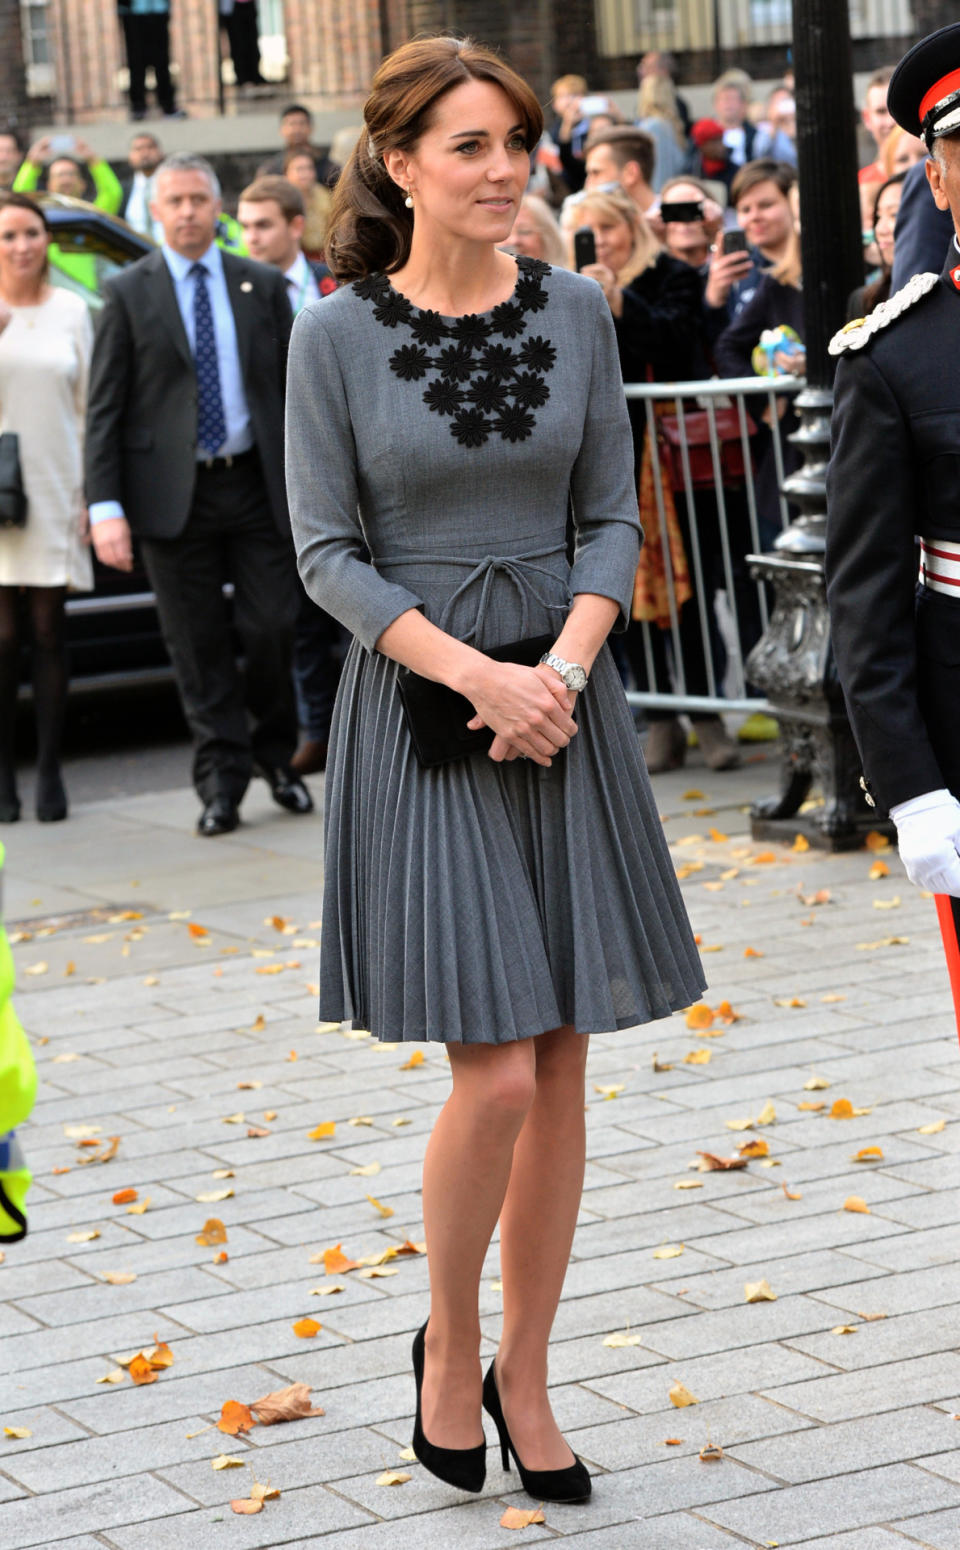 <p>For an engagement at a children’s mentoring programme, Kate wore a grey Orla Kiely dress from the designer’s AW11 collection. Stuart Weitzman pumps and a black suede Mulberry clutch completed her look. </p><p><i>[Photo: PA]</i></p>